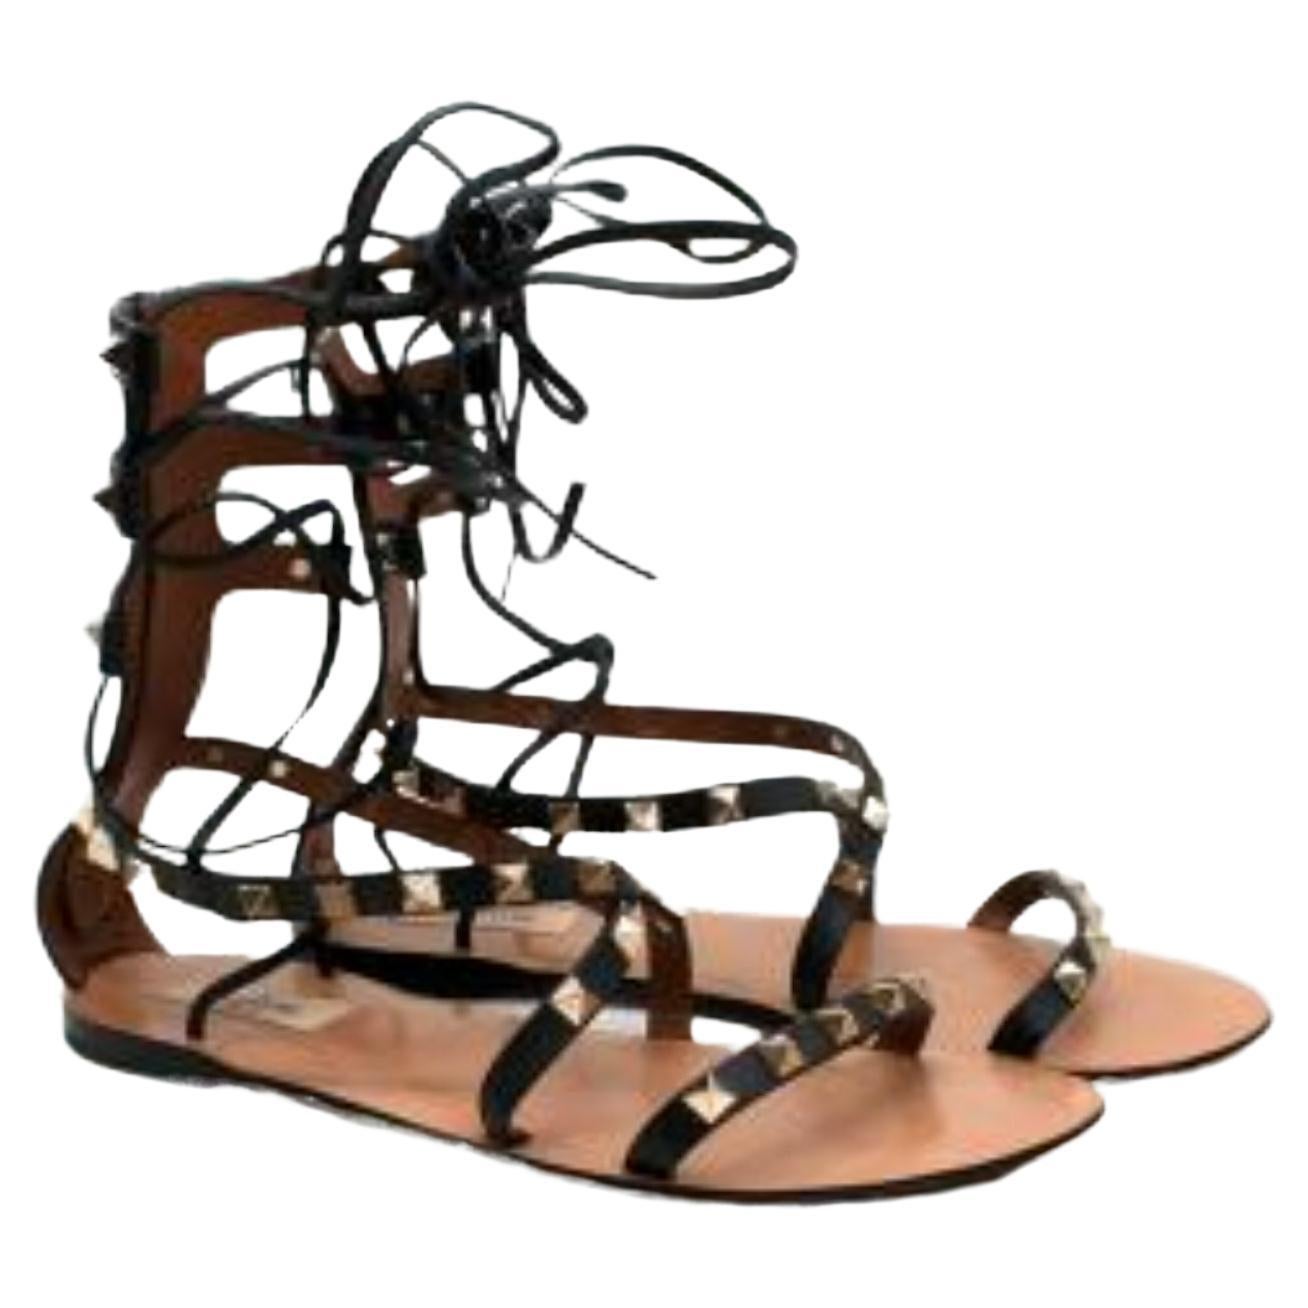 Rockstud Gladiator Sandal In Calfskin With Straps for Woman in Tan Brown   Valentino IN